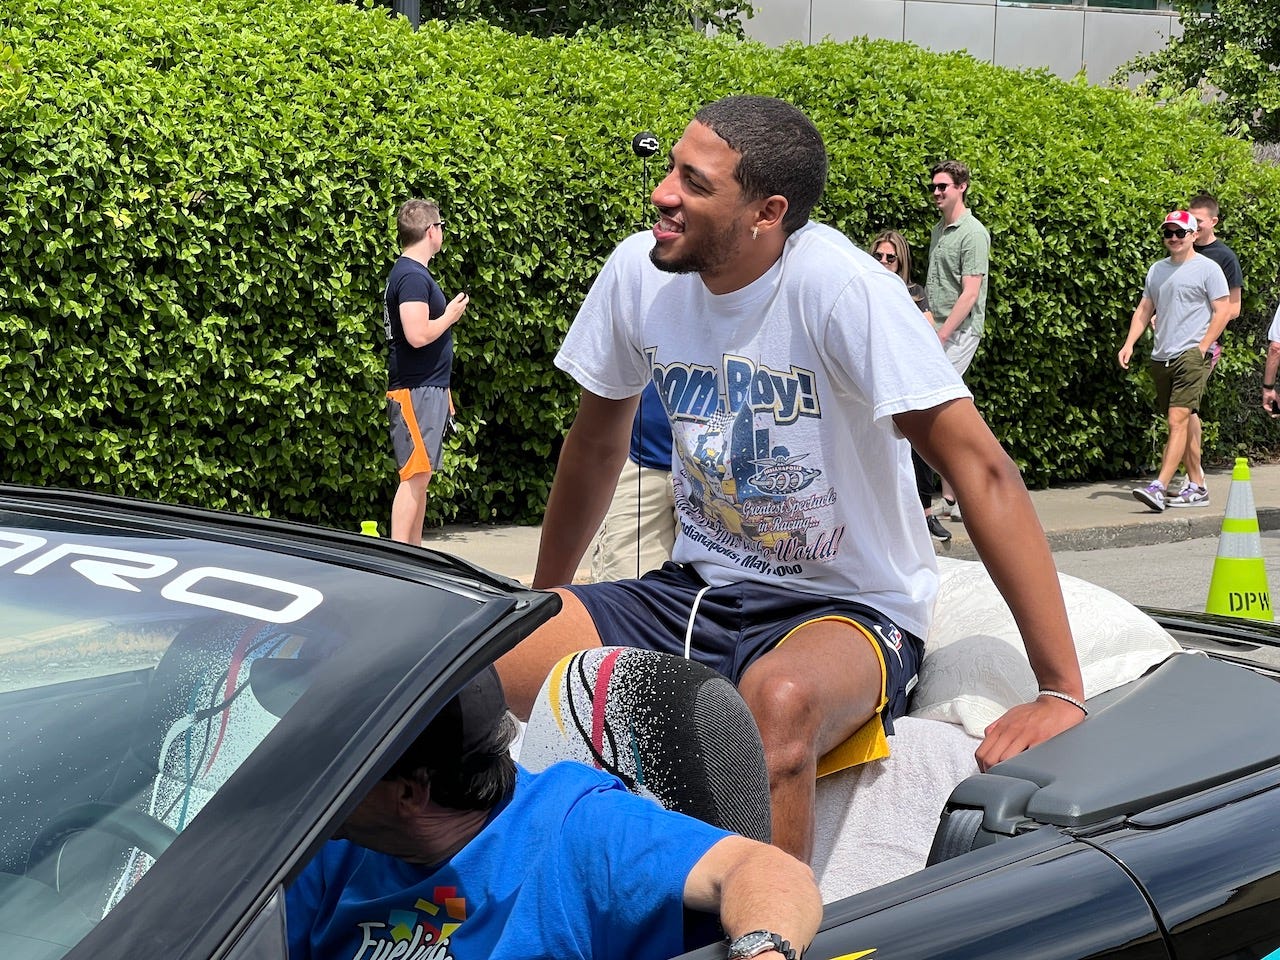 Tyrese Haliburton is in the back of a Chevy convertible as he rides in the 500 Festival Parade with a vintage Zoom, Baby! Pacers t-shirt.